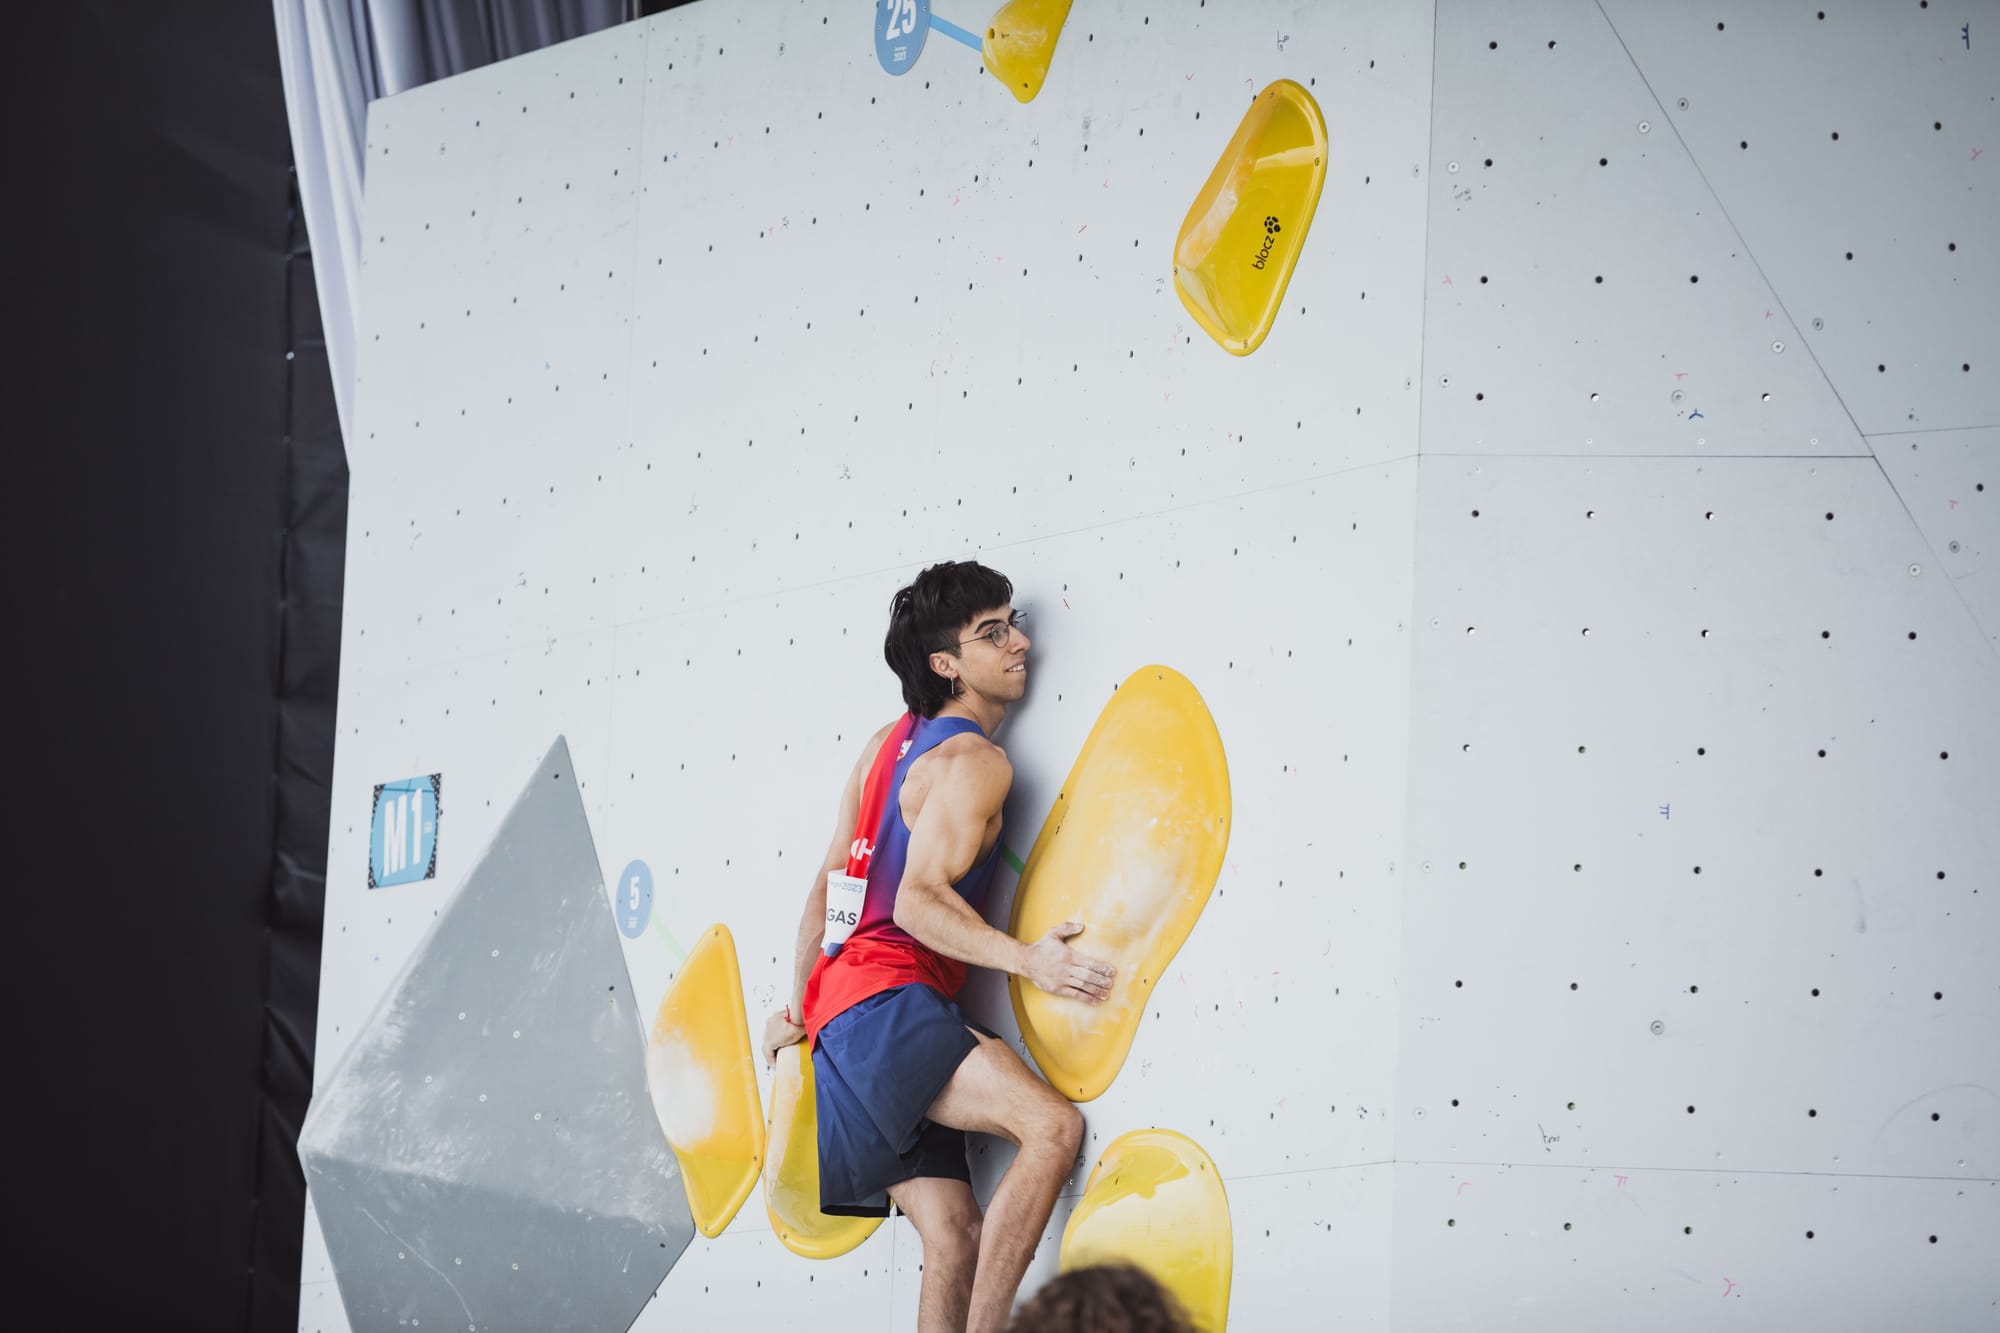 Benjamin Vargas on third boulder on the slab in the semi-final final round